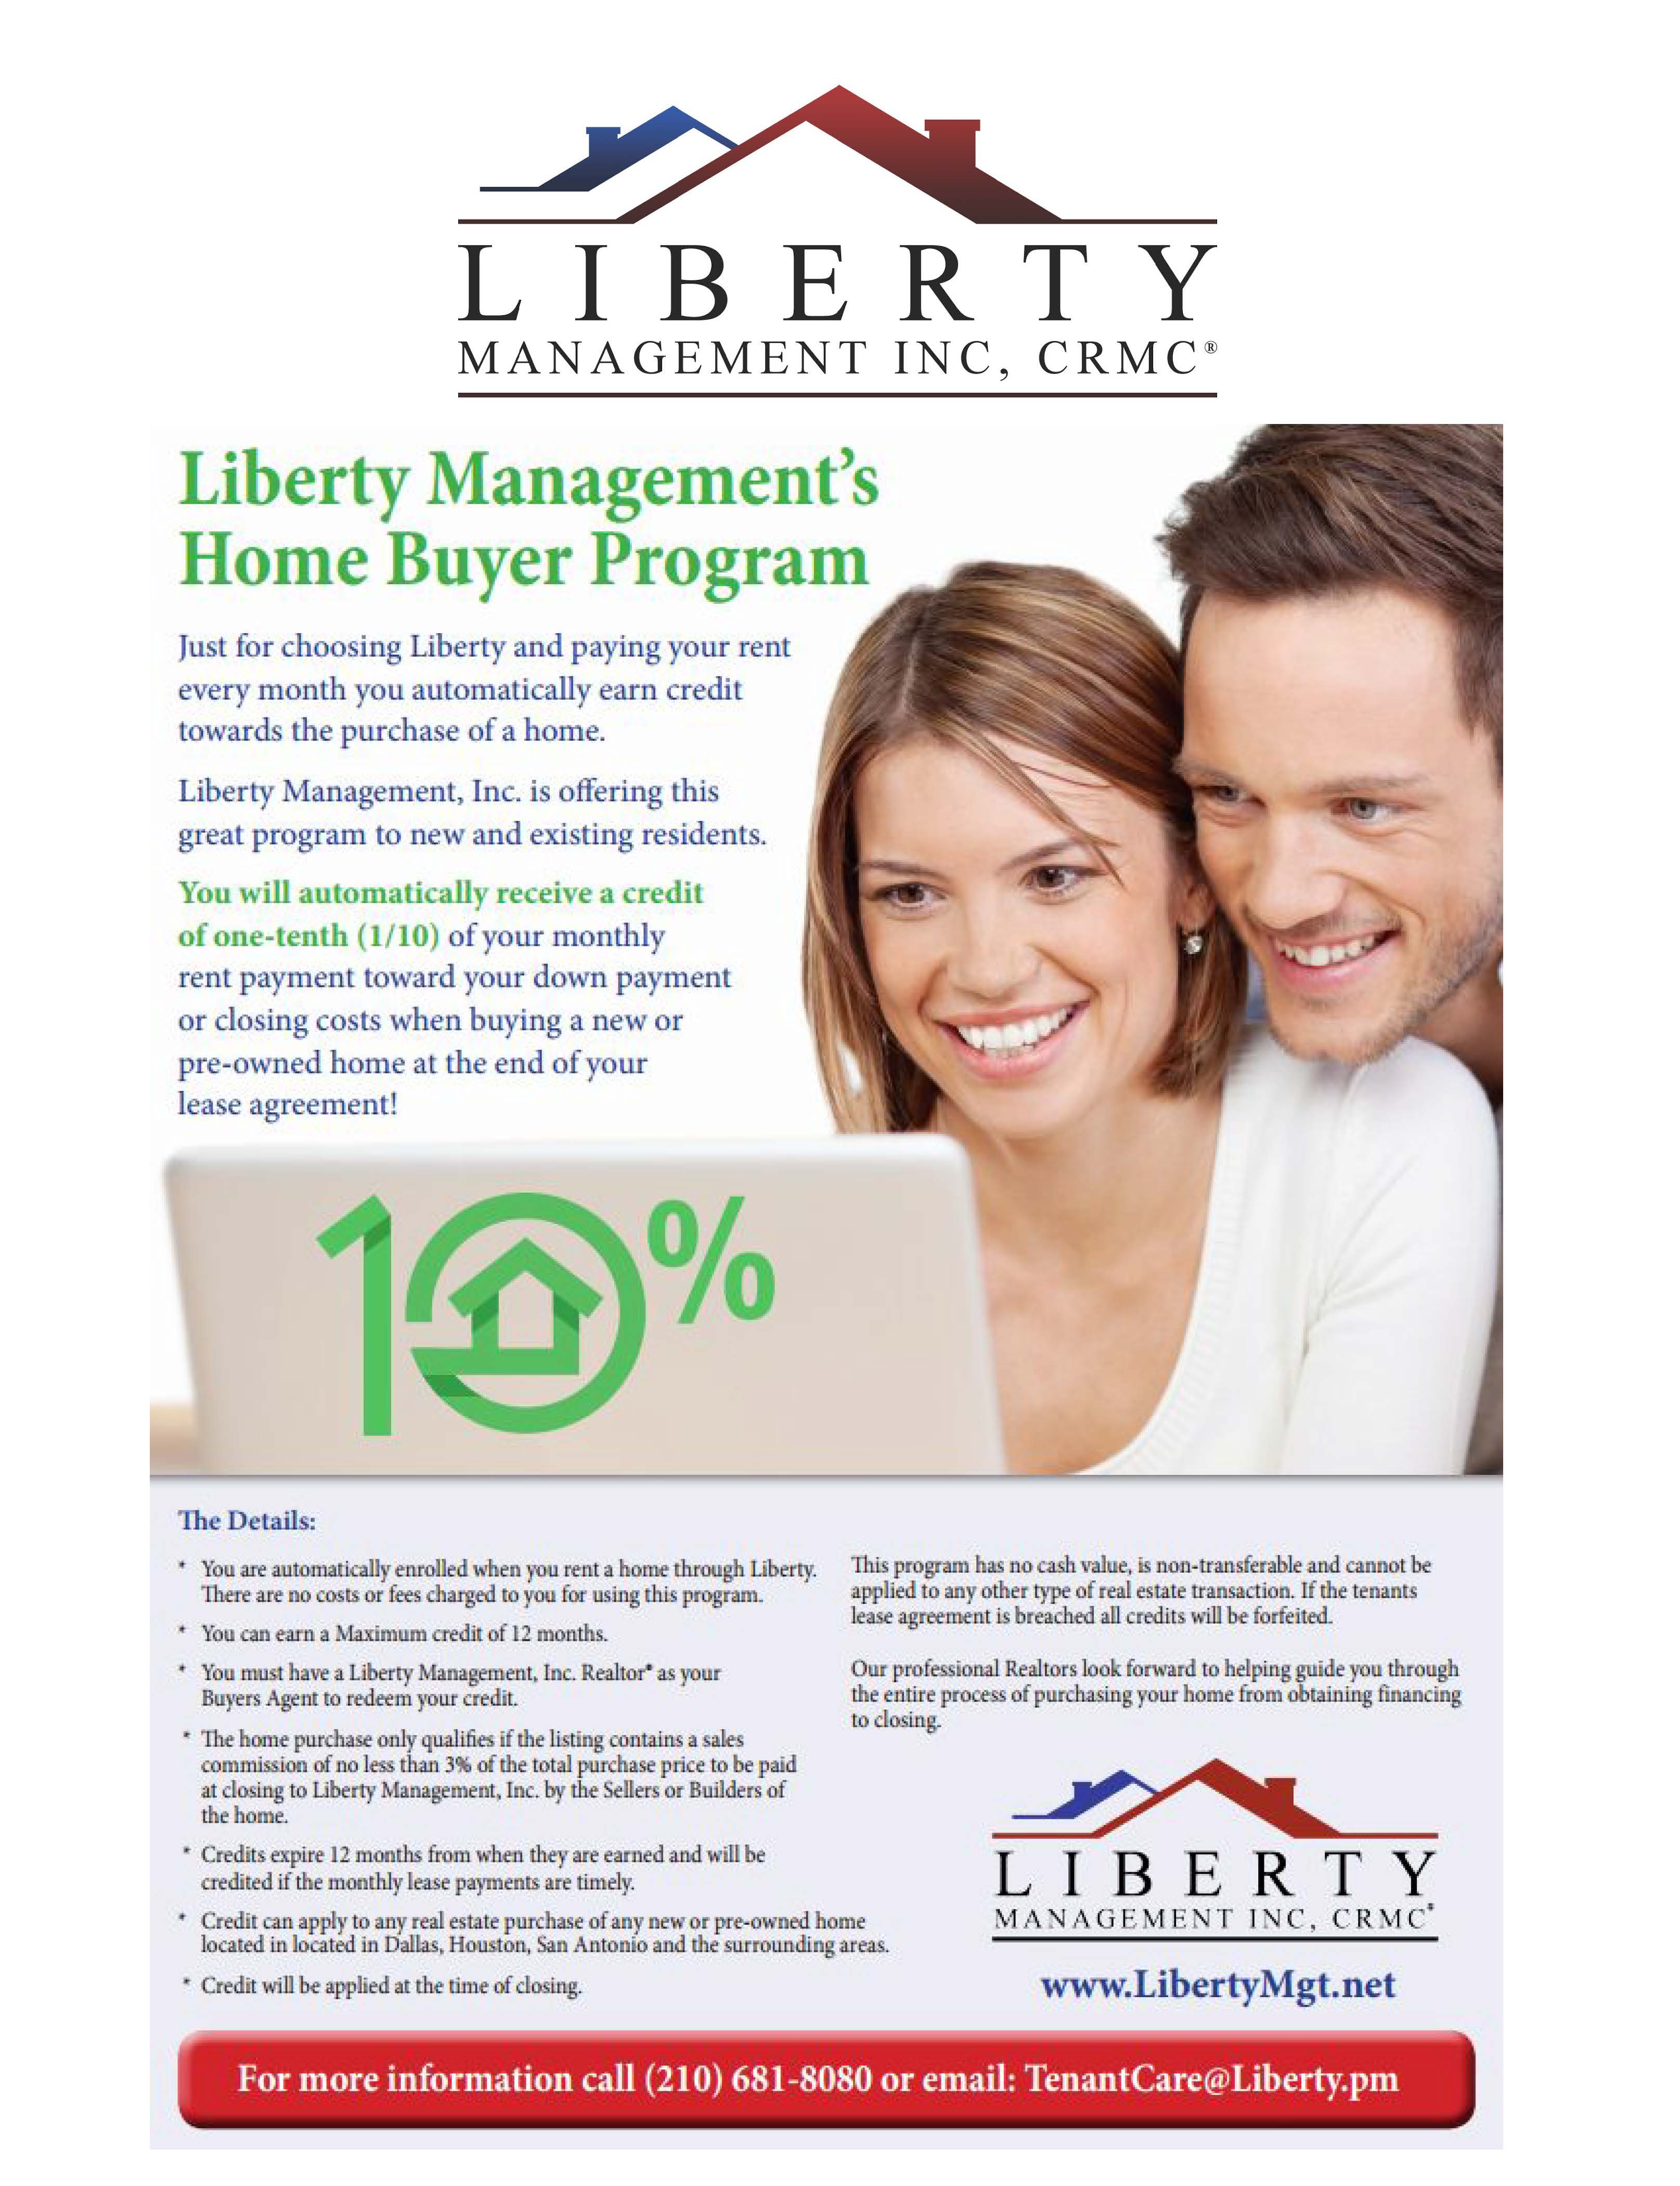 Top Legacy Home Buyer Program of all time Learn more here 